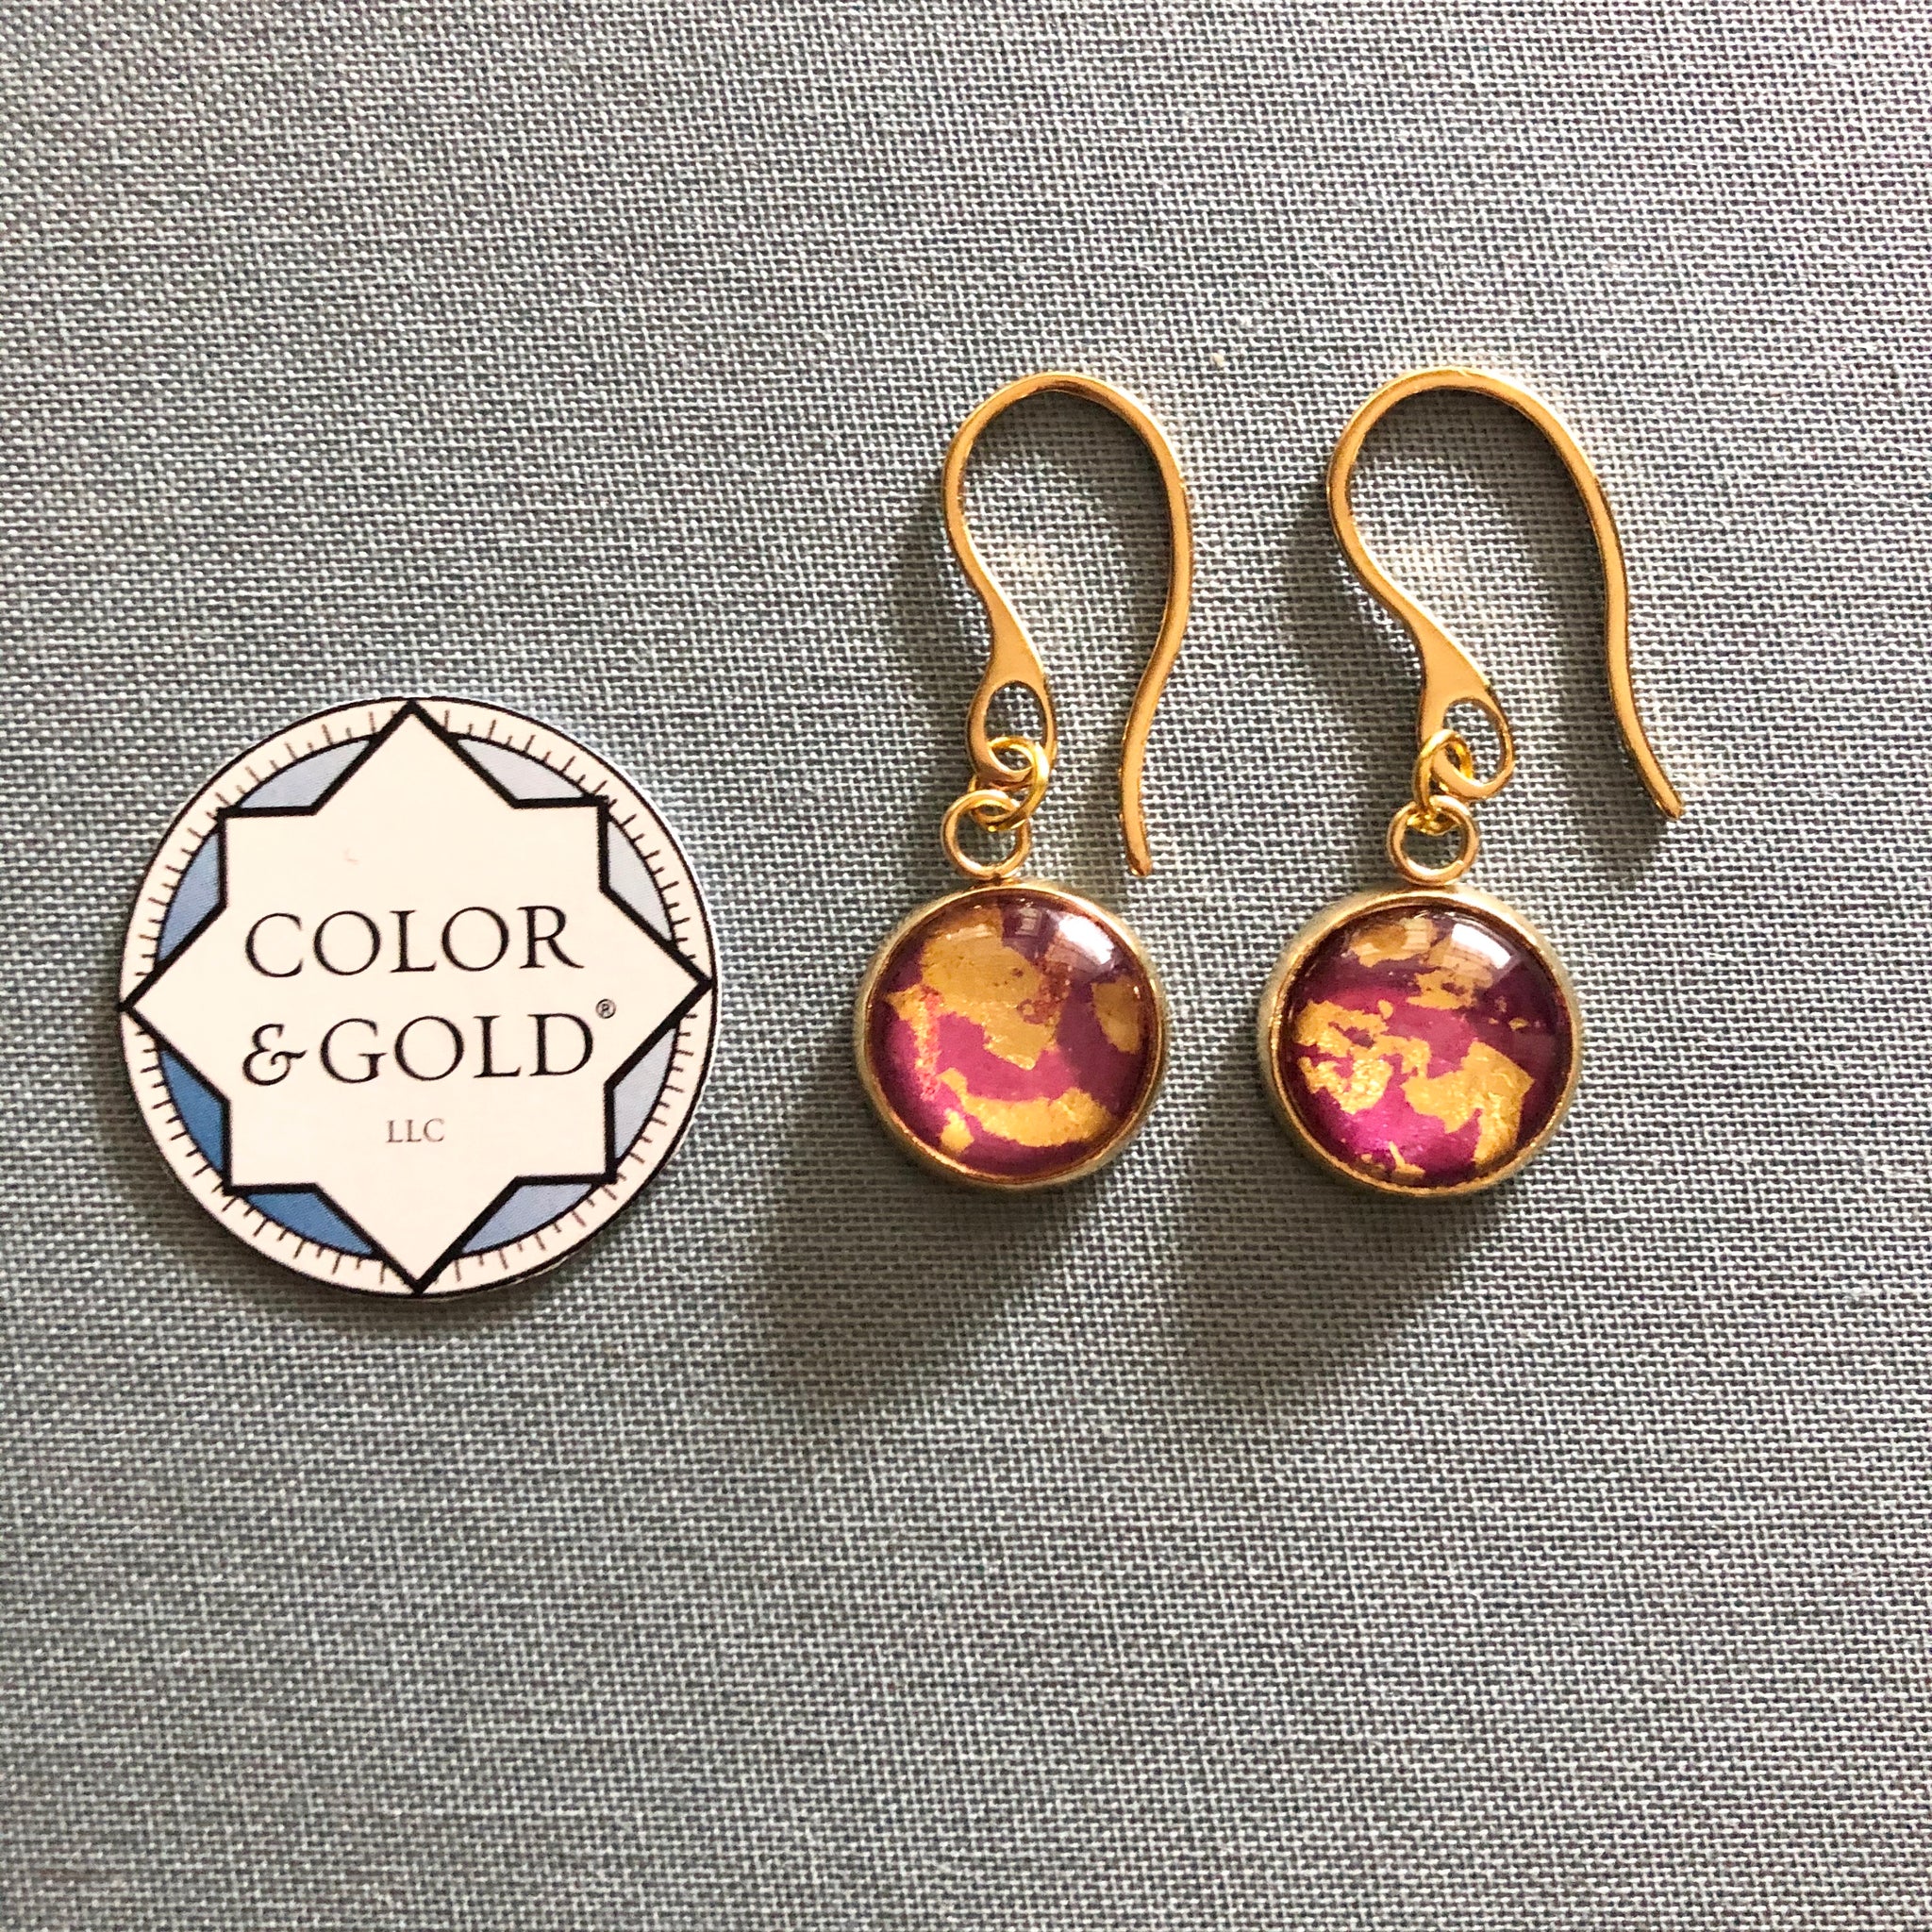 Color & Gold Abstract Earrings in pink & goldound